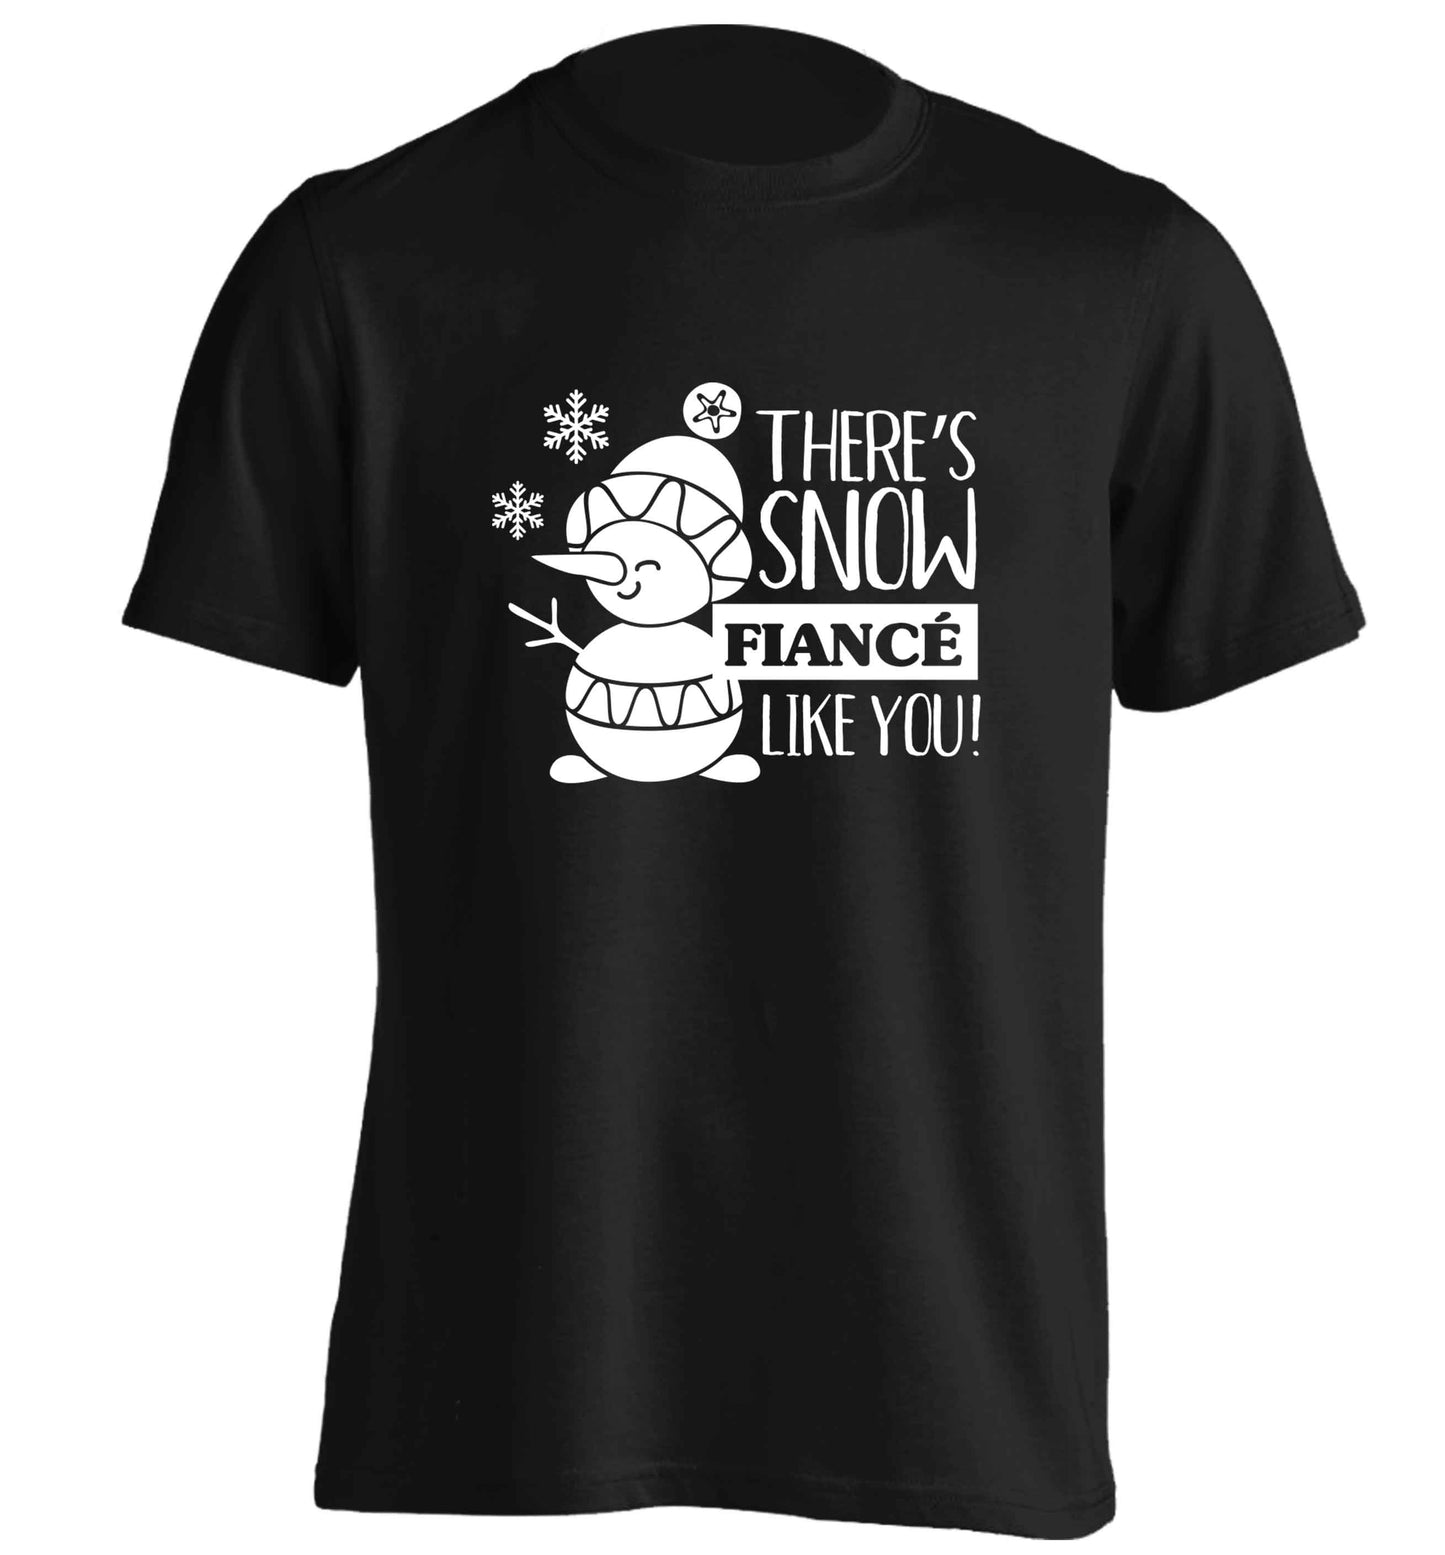 There's snow fiance like you adults unisex black Tshirt 2XL